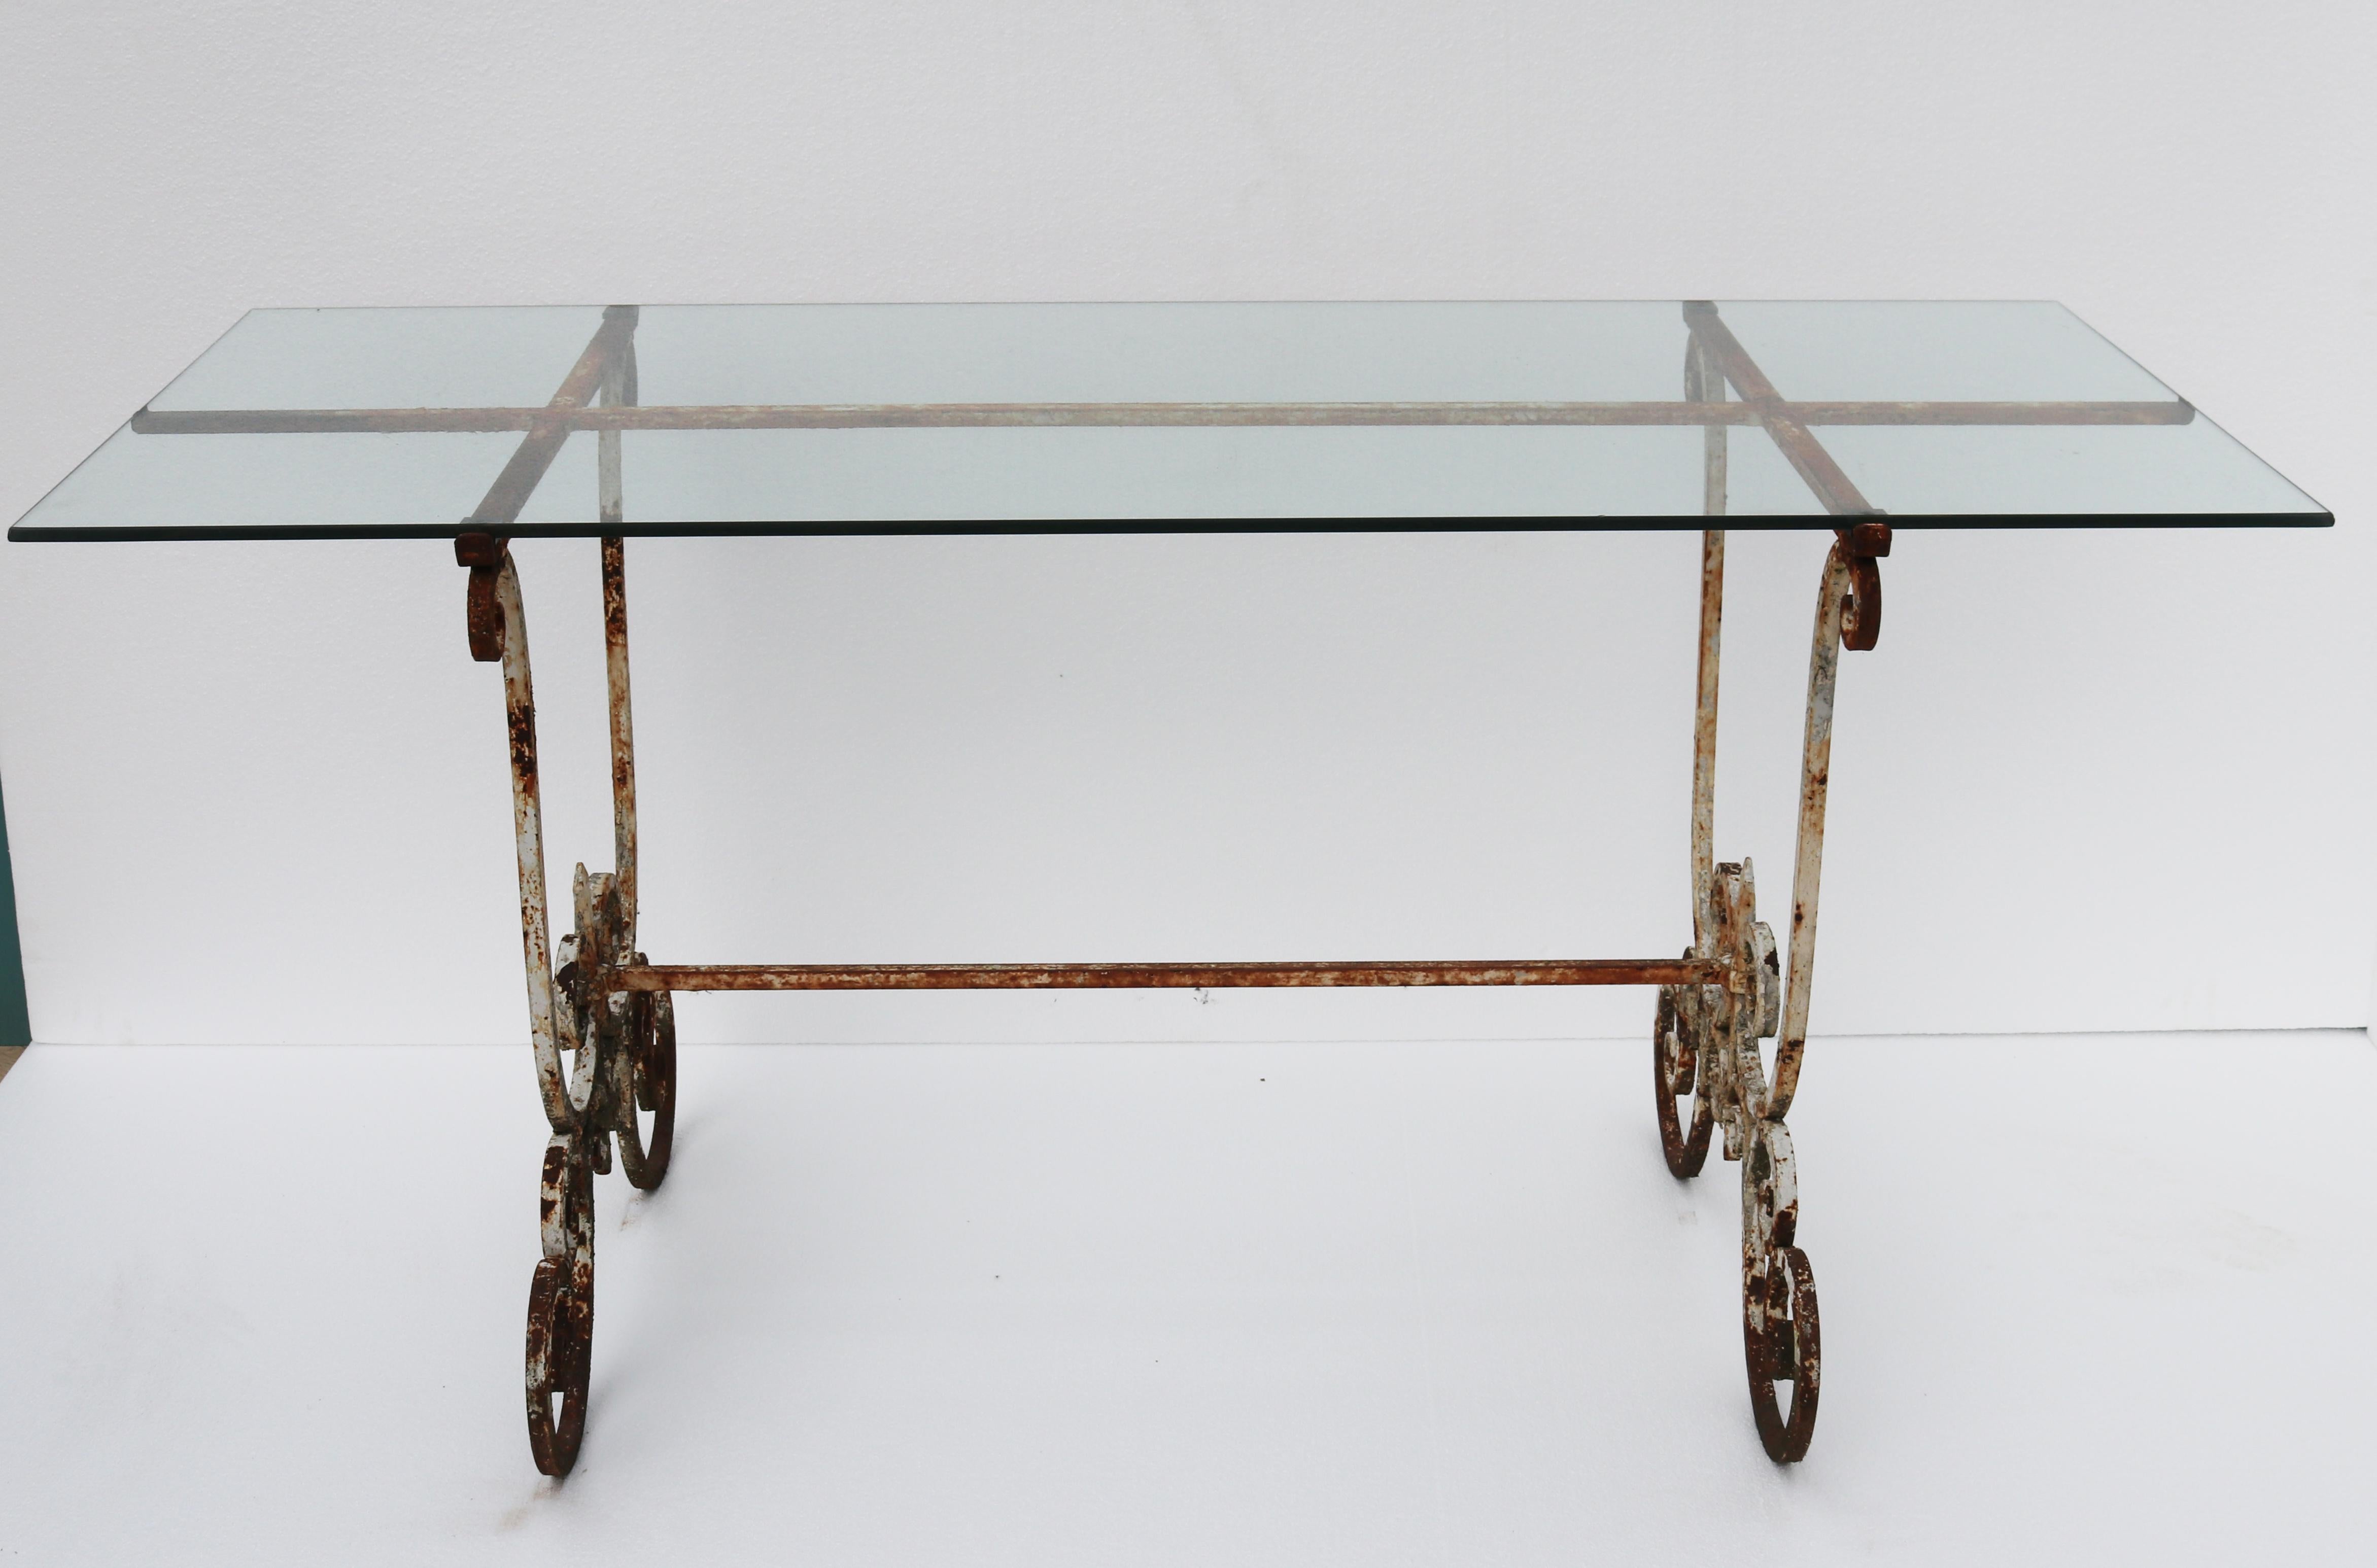 A plate glass table top supported on an iron frame of scrolling design.